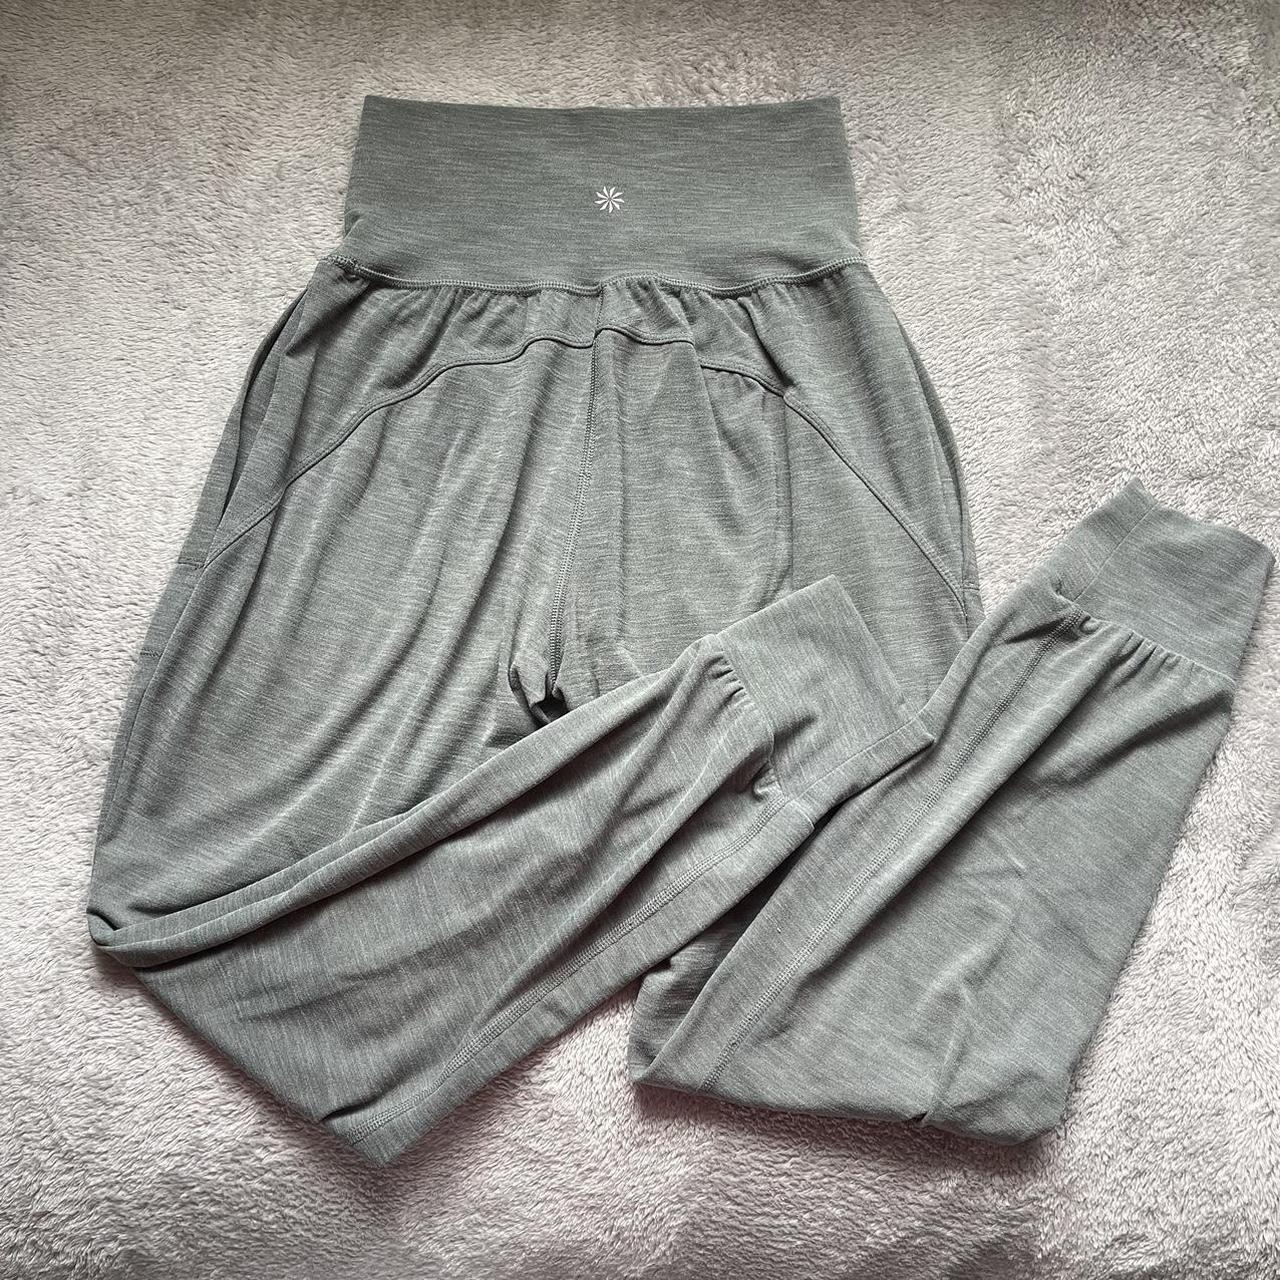 Athleta Salutation Jogger - new with tags, dusty - Depop